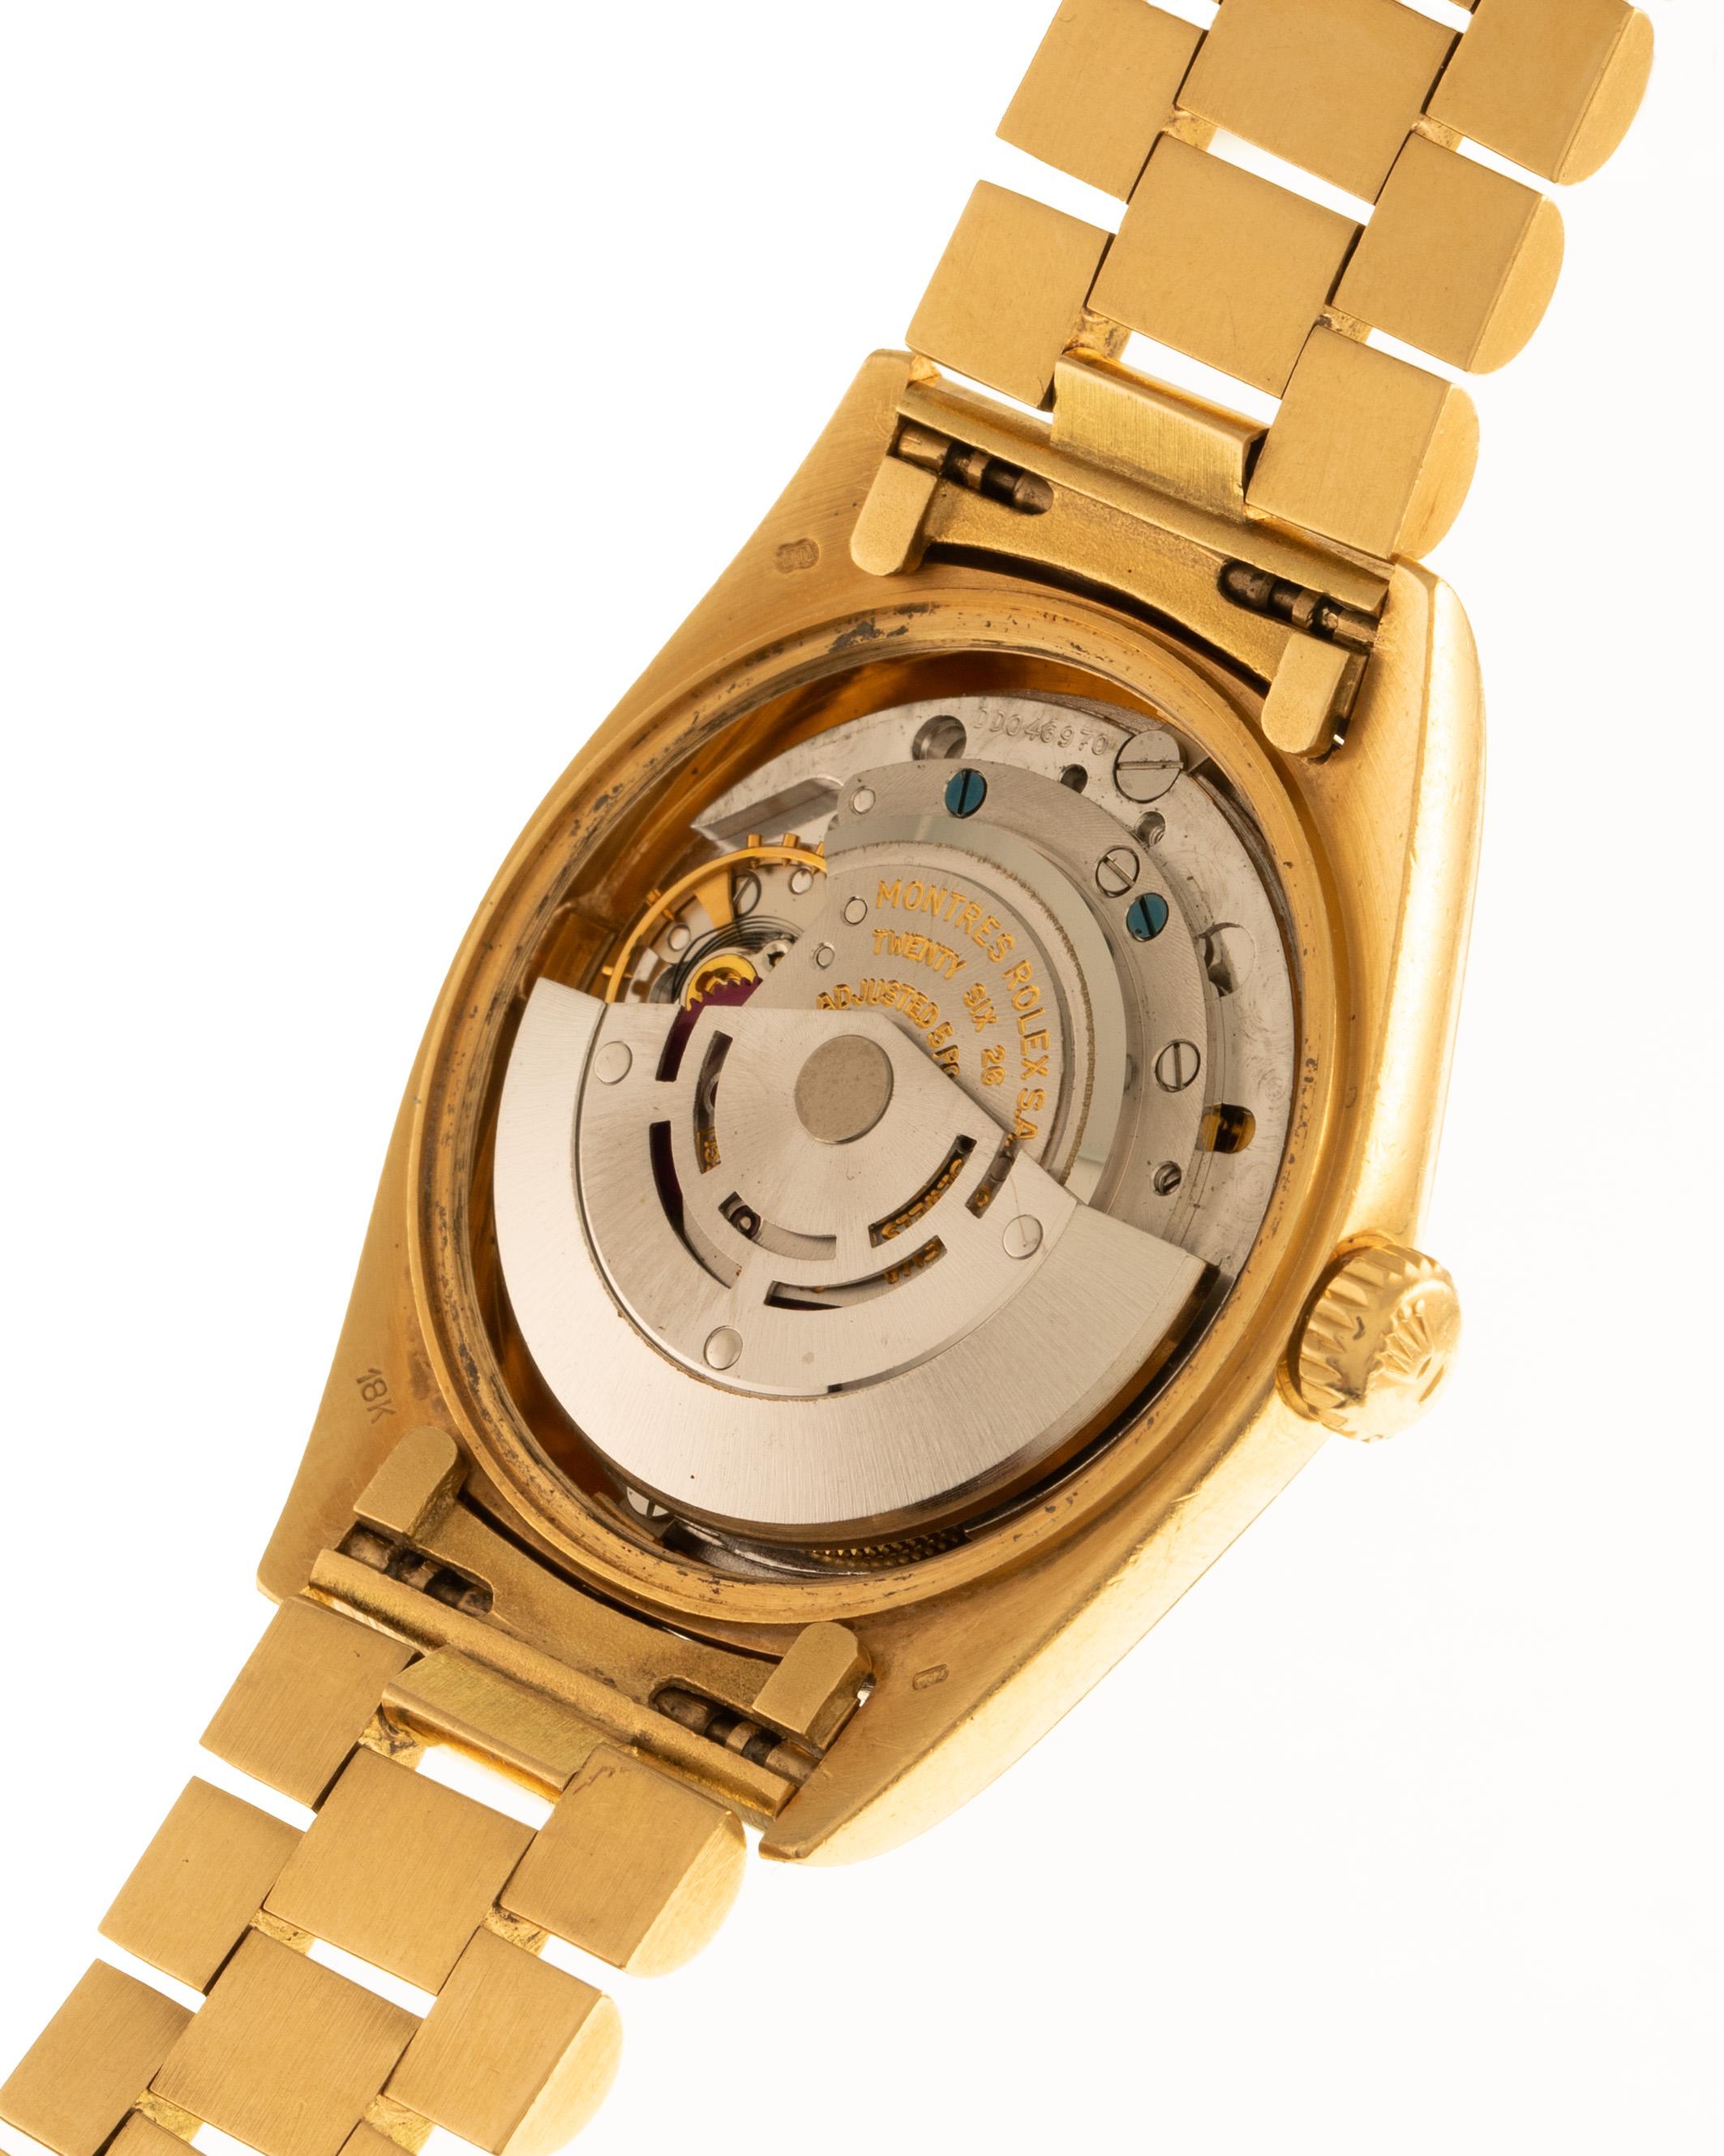 Rolex Oyster Perpetual Day Date in 18 Karat Yellow Gold with Gold Rolex Bracelet In Good Condition For Sale In Milan, IT